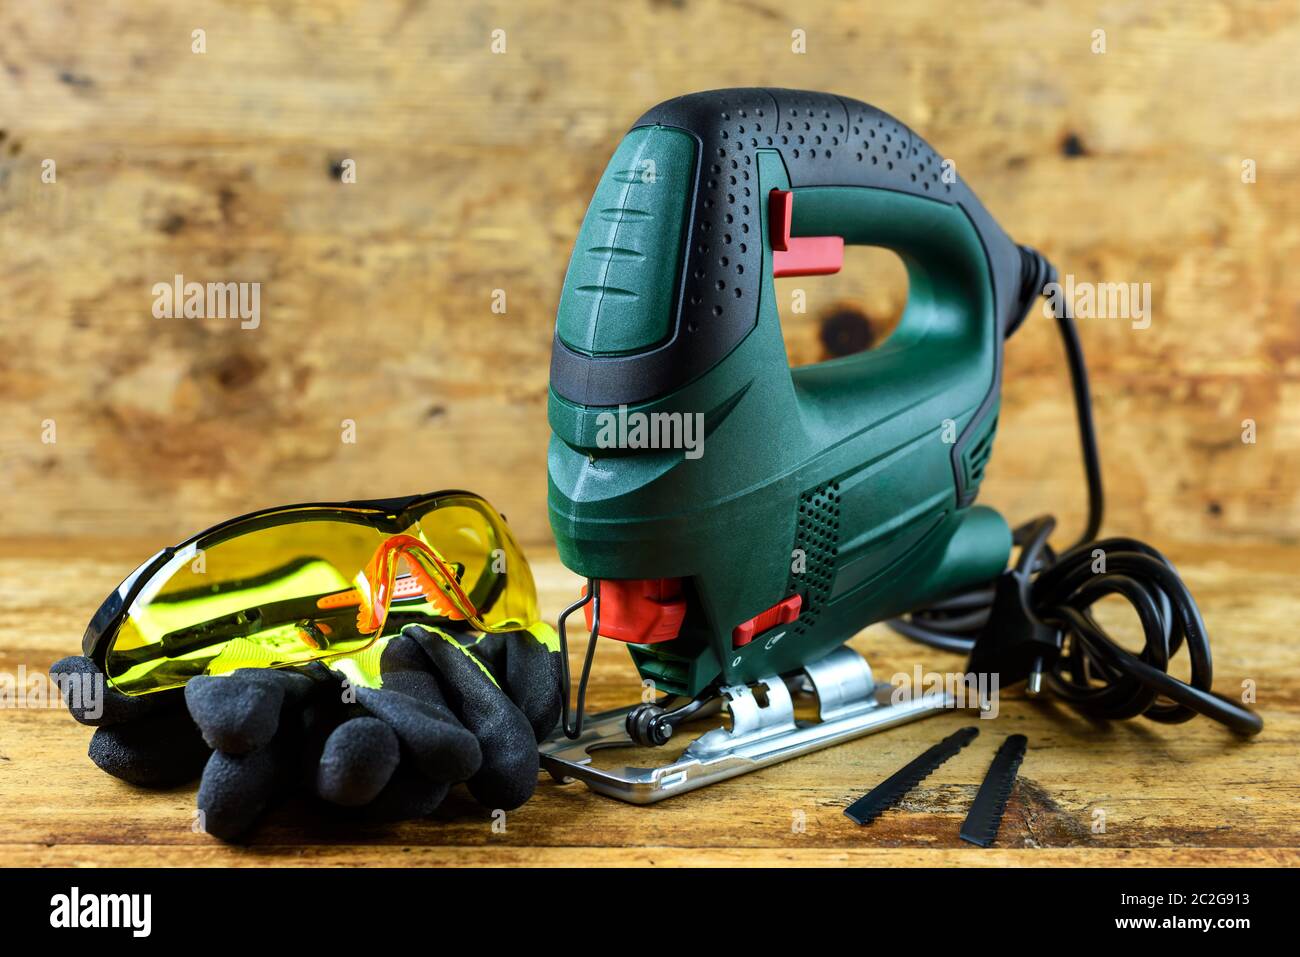 A jigsaw power tool, protective glasses, gloves and blades for electric jigsaw on vintage wooden background. Stock Photo